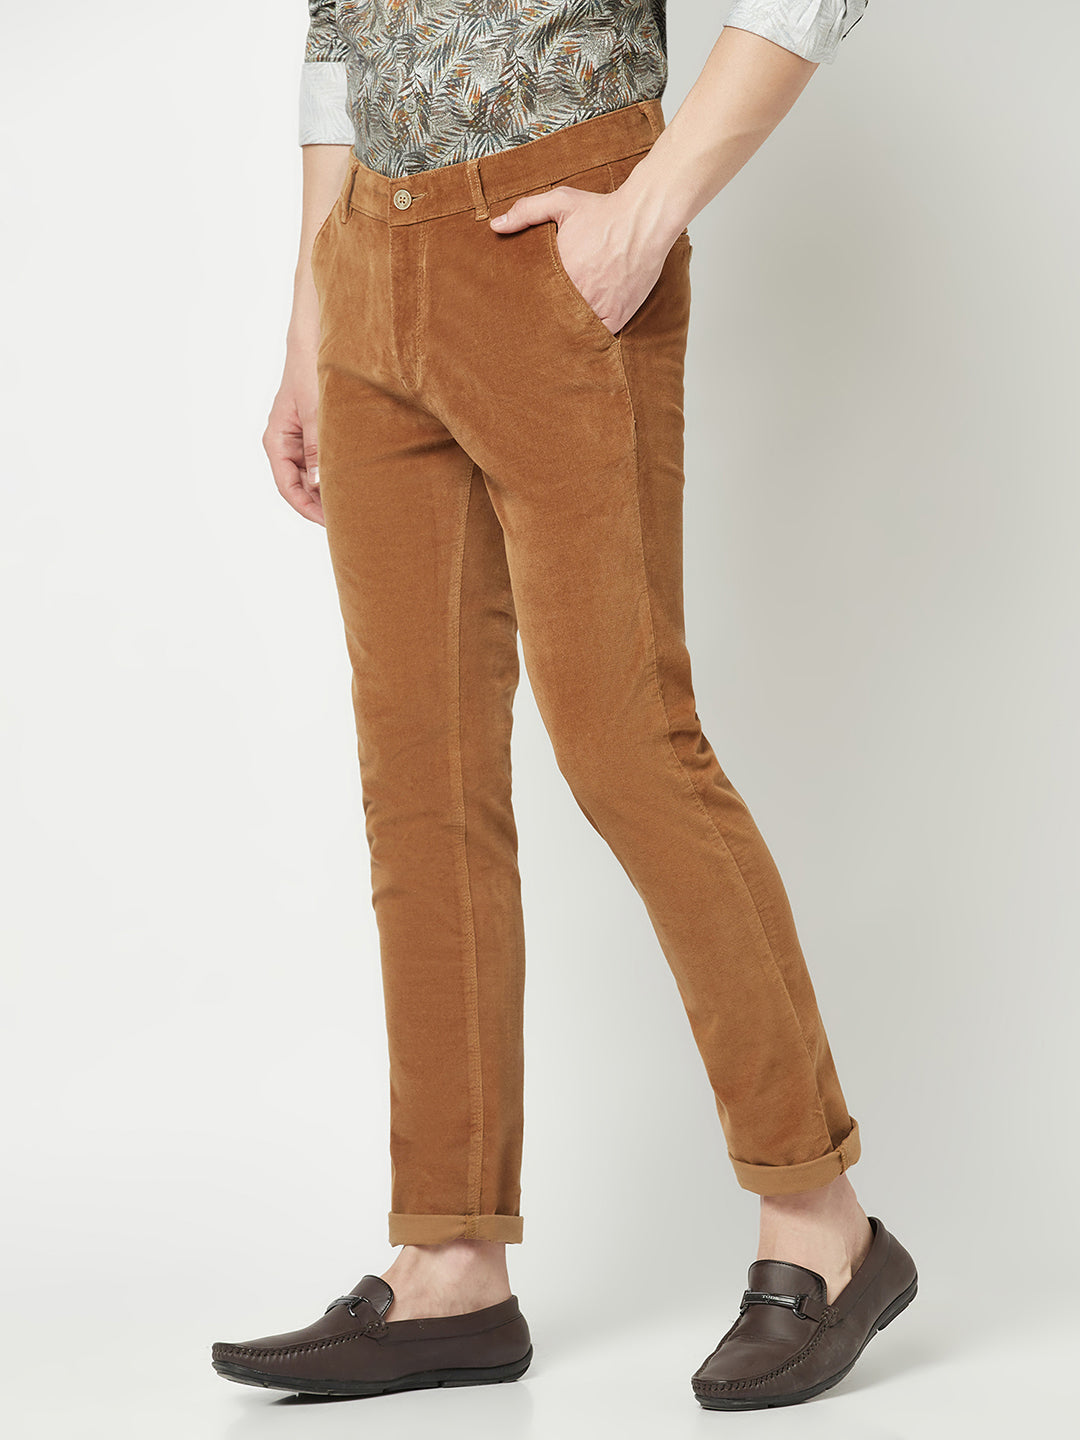 Buy Mast & Harbour Men Light Brown Trousers - Trousers for Men 211923 |  Myntra